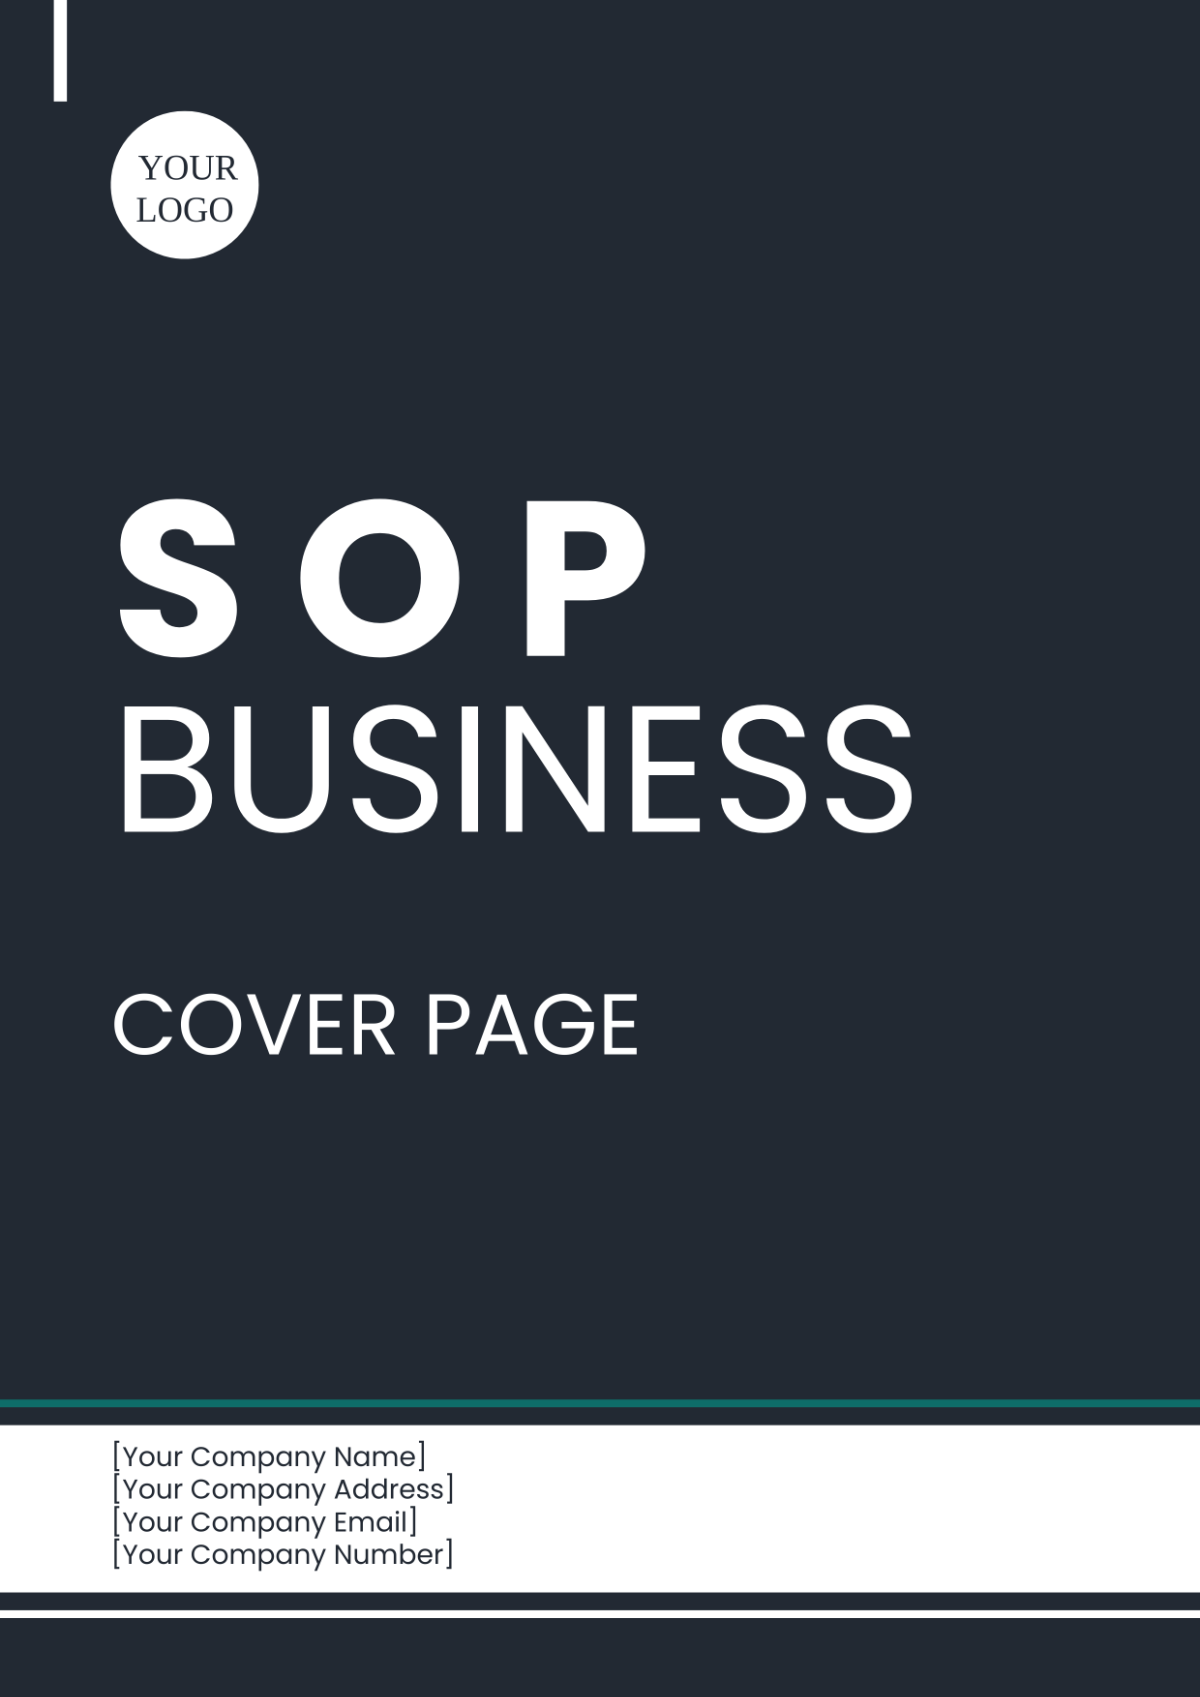 SOP Business Cover Page